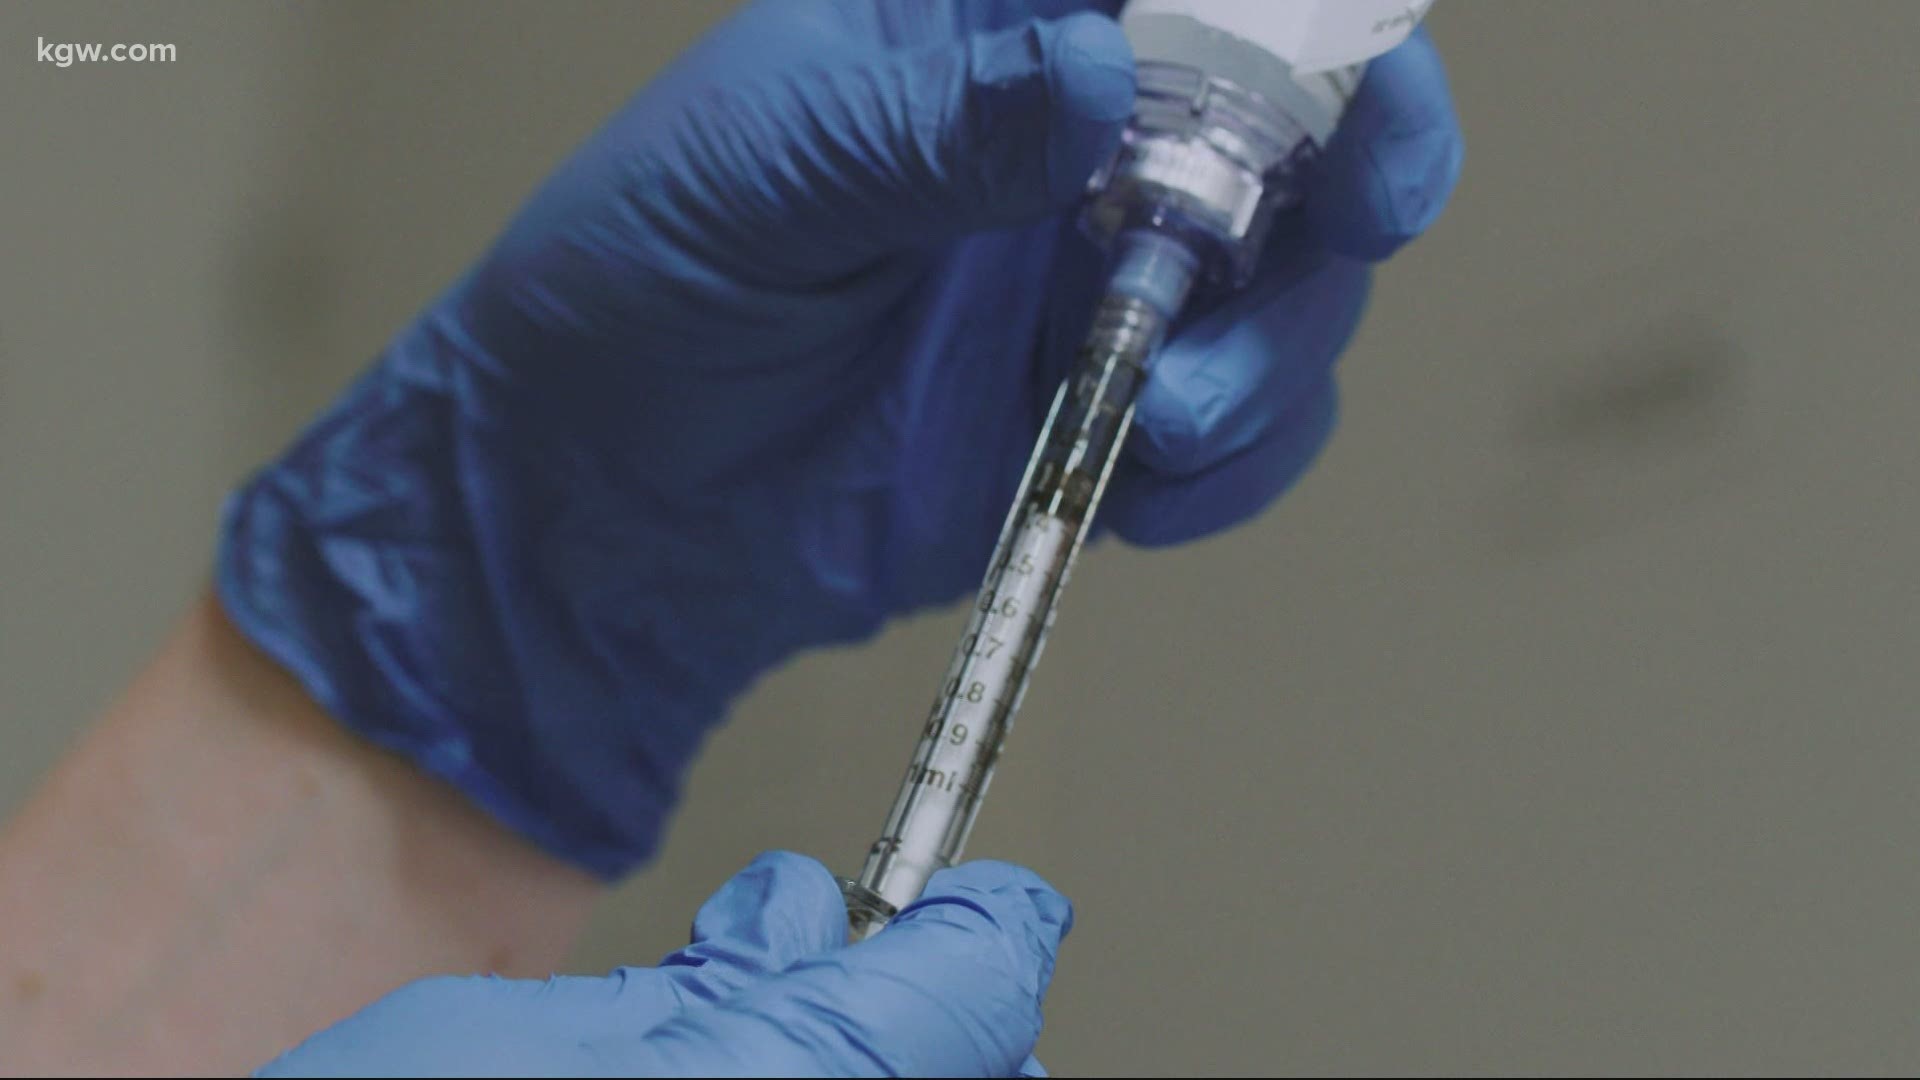 Healthcare workers will be first people to get COVID-19 vaccine in Michigan, state plan says